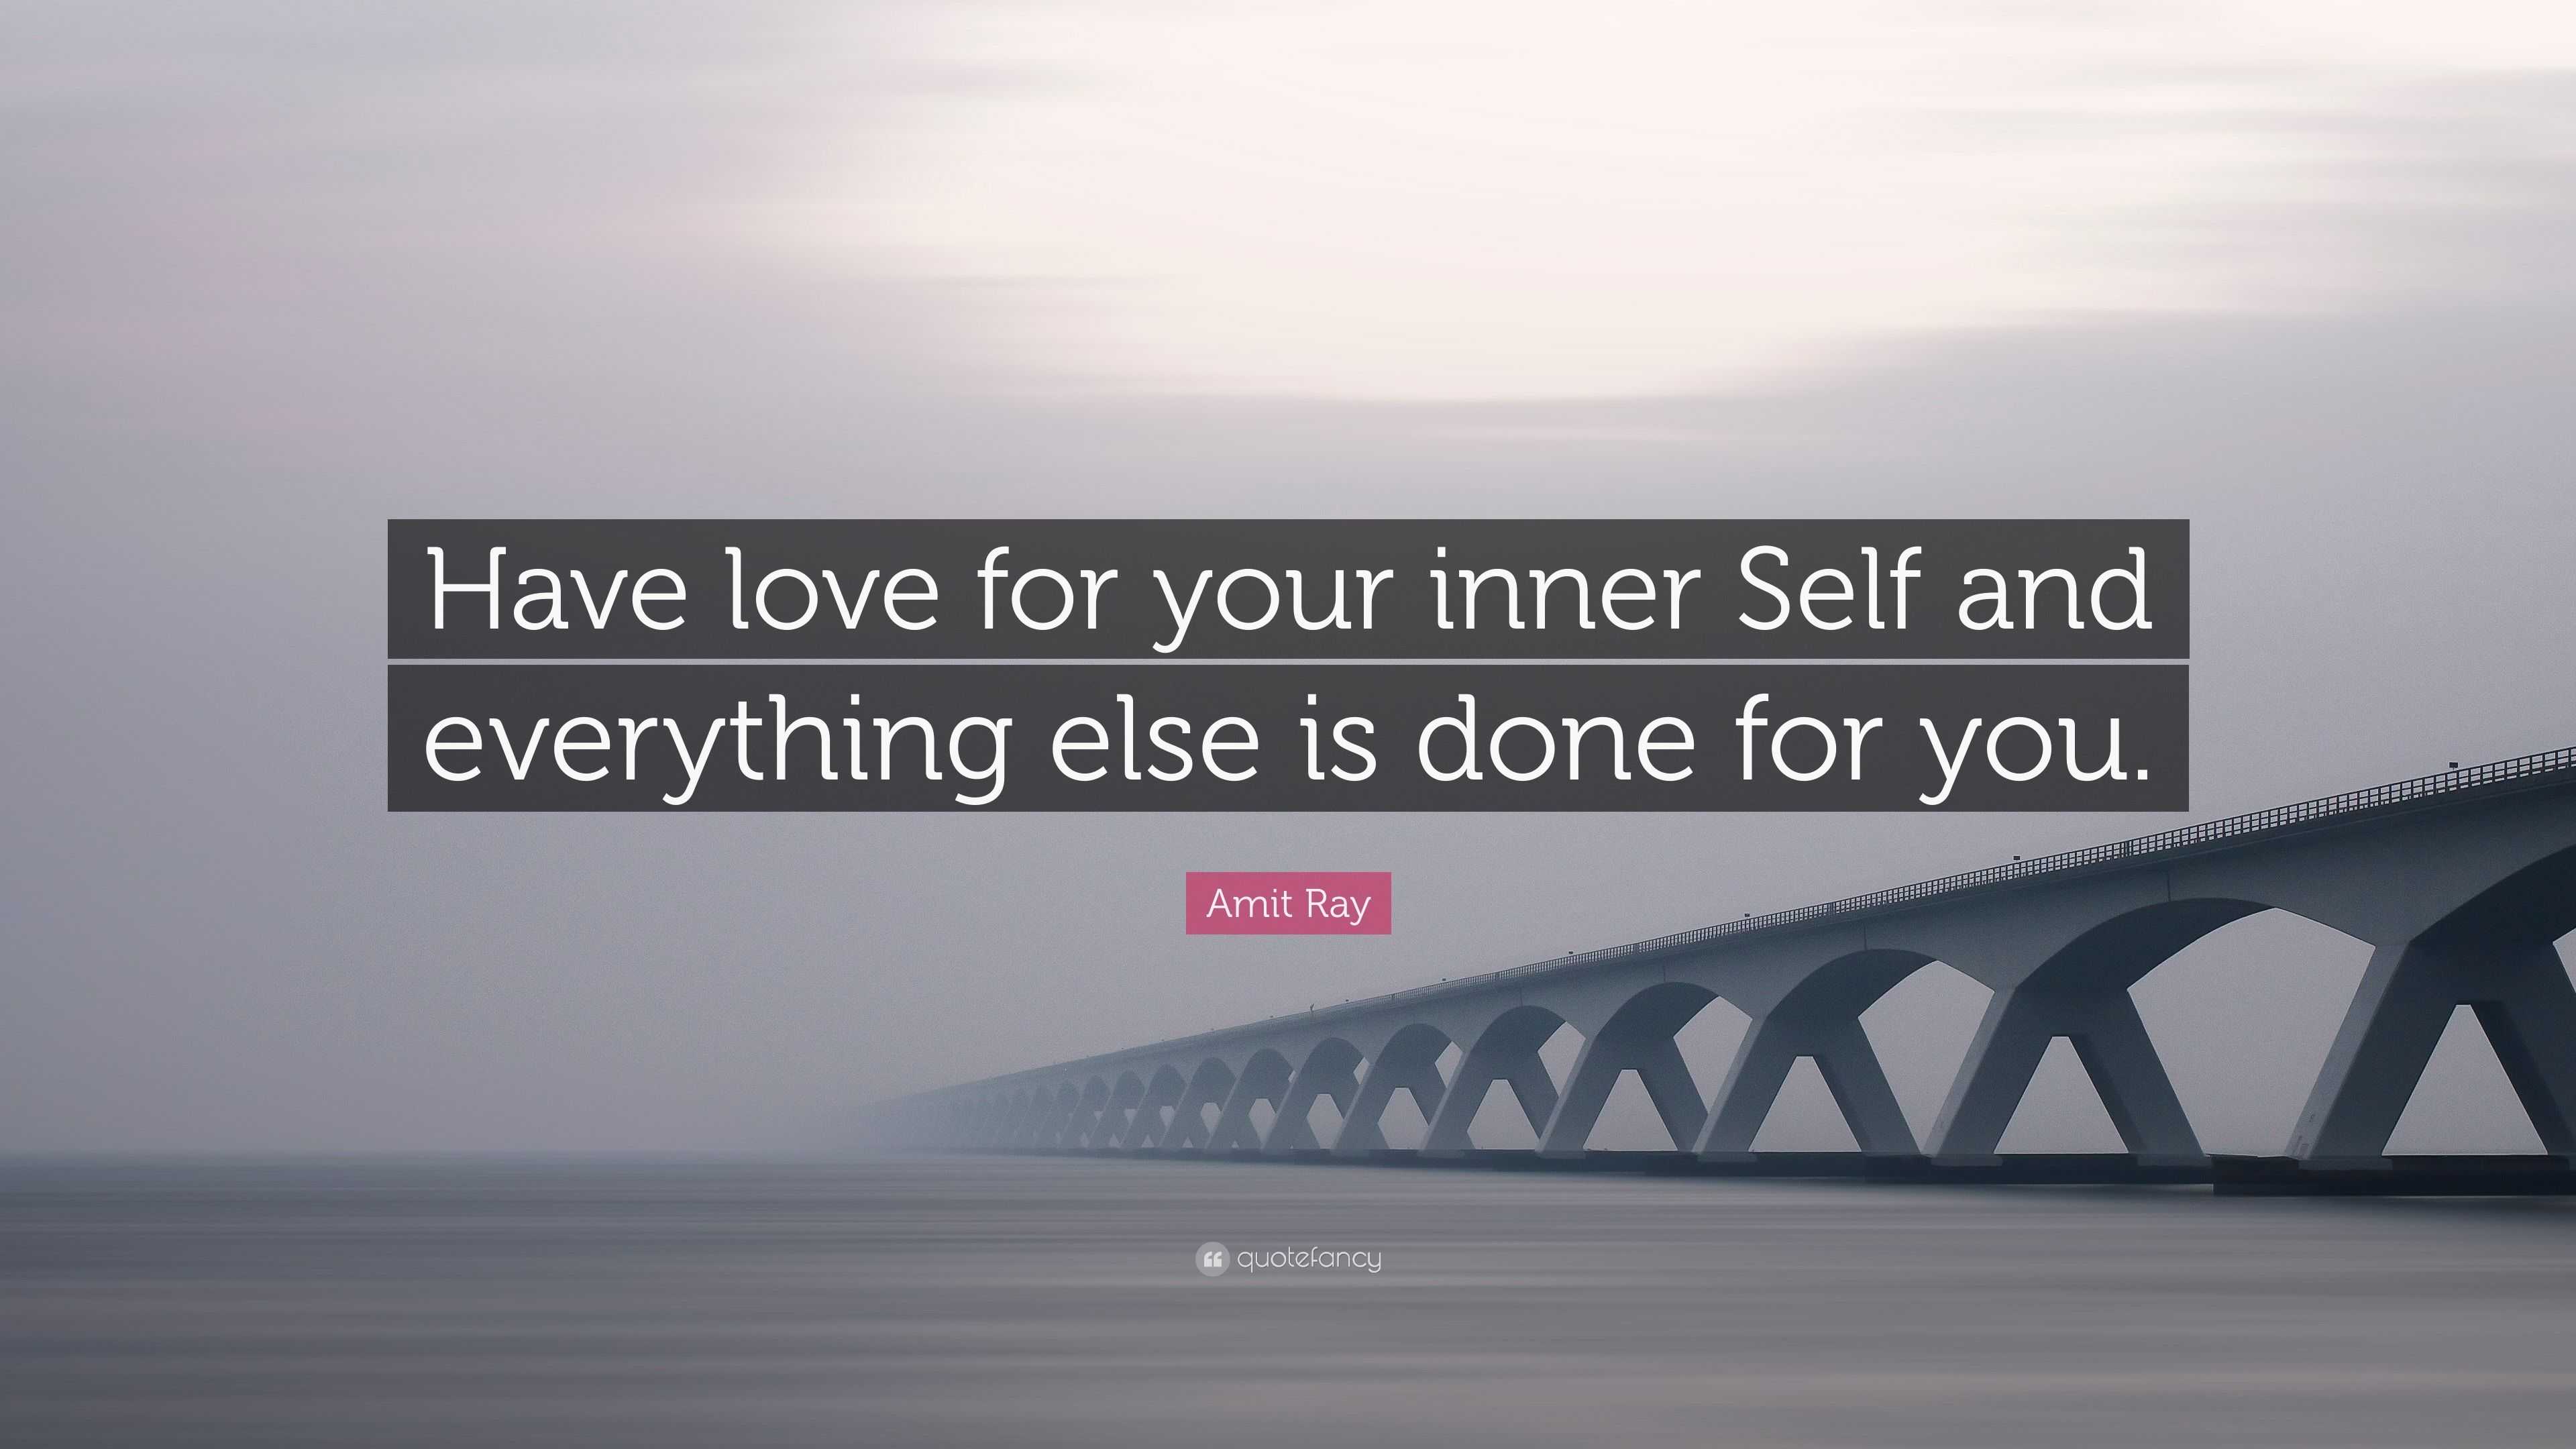 Self-love is the best love. Start with Innersy. 💖 #innersy